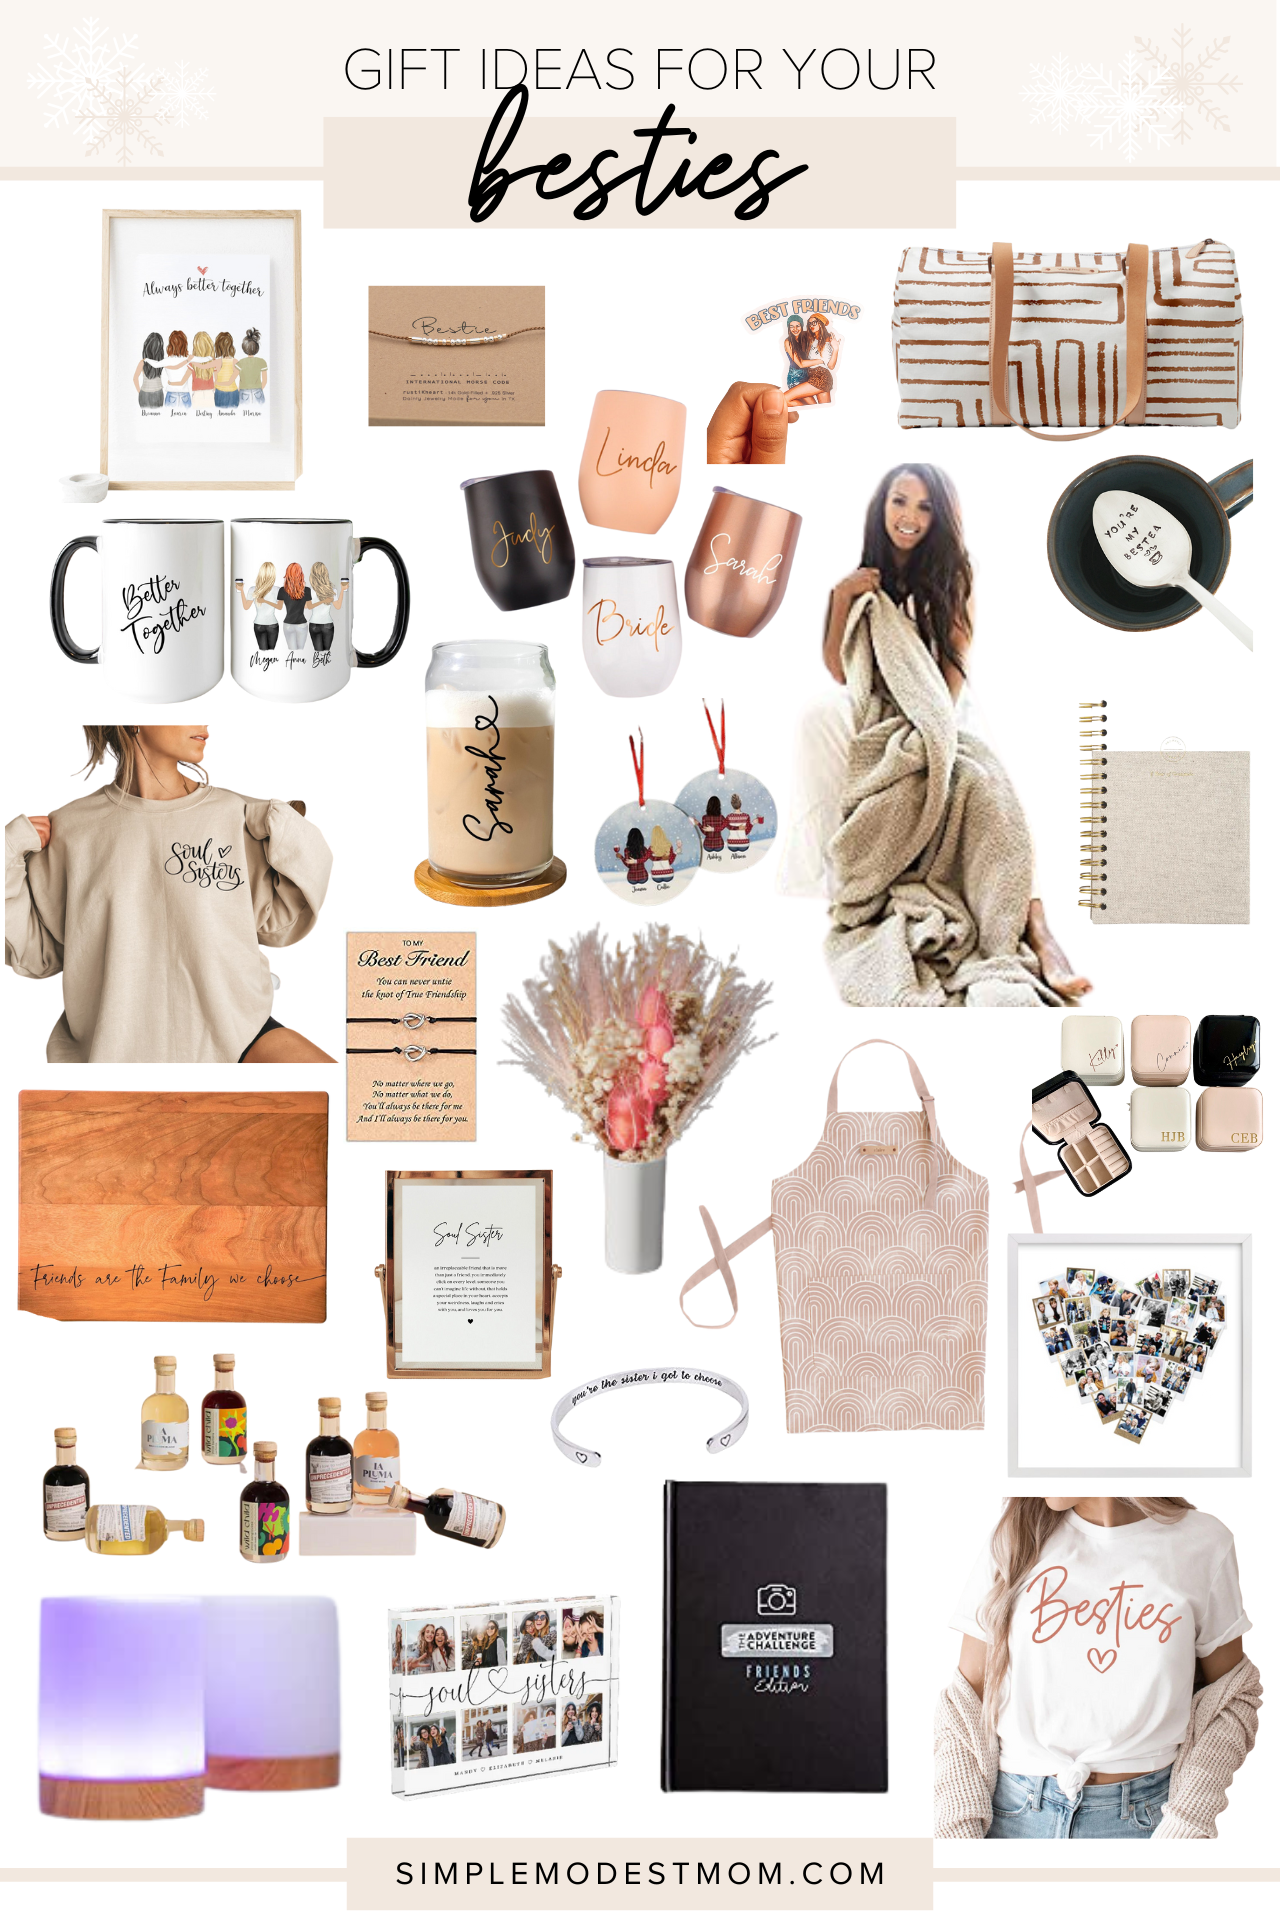 42 Useful Fun and Thoughtful Engagement Gift Ideas